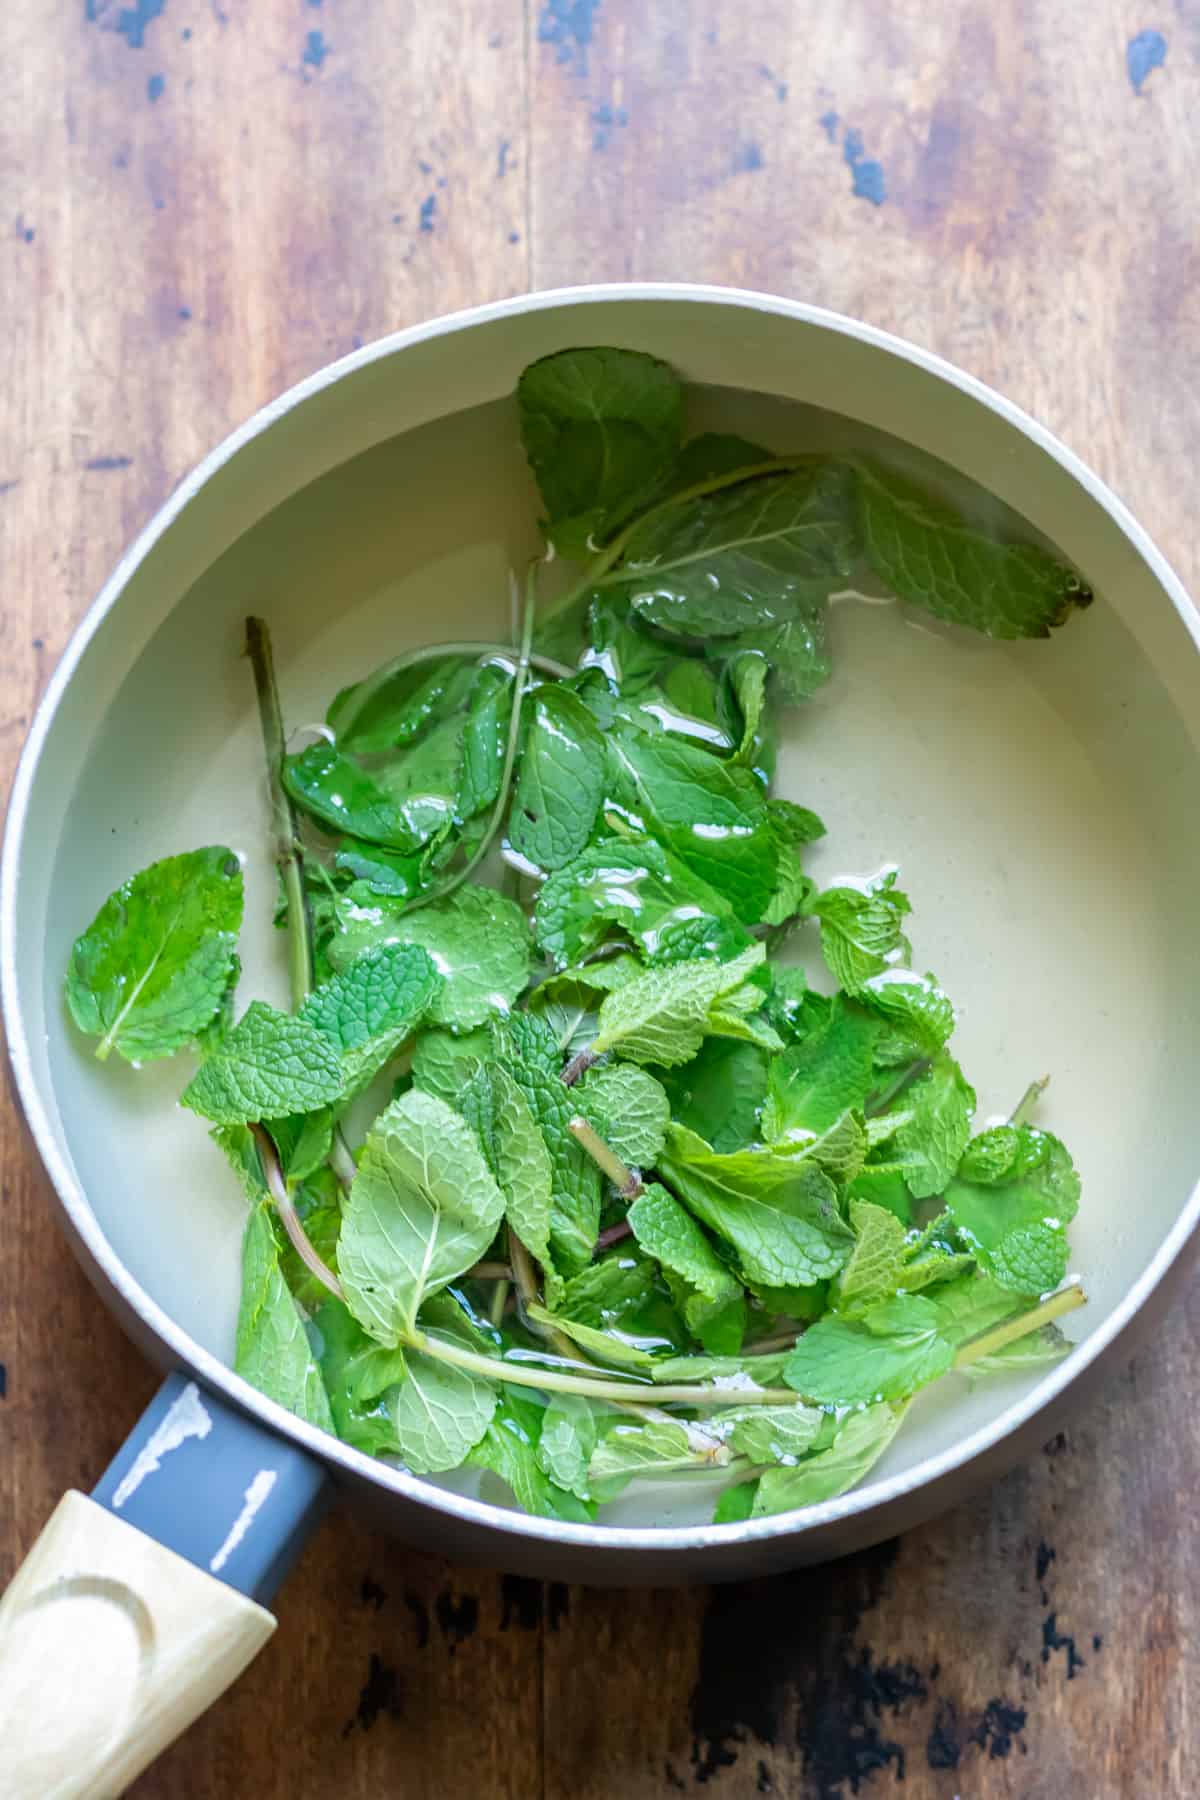 Mint added to the pan.